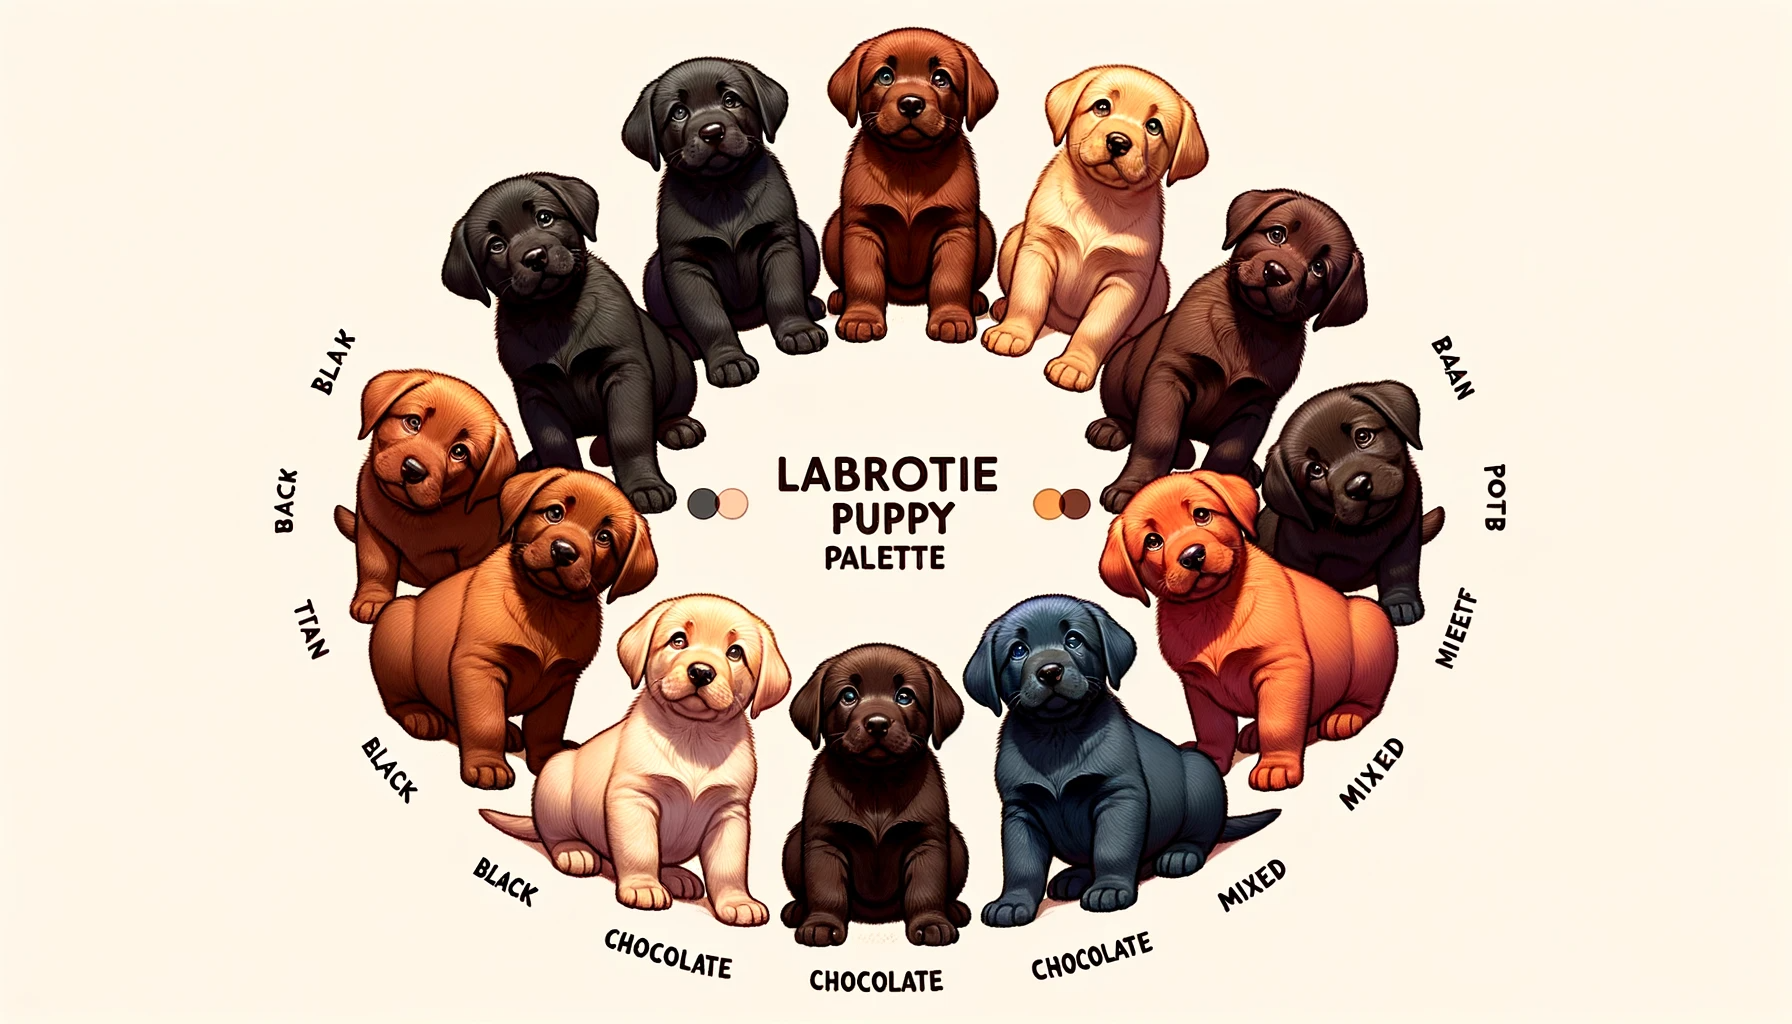 A Labrottie Puppy palette showcasing the different colors these adorable pups can come in